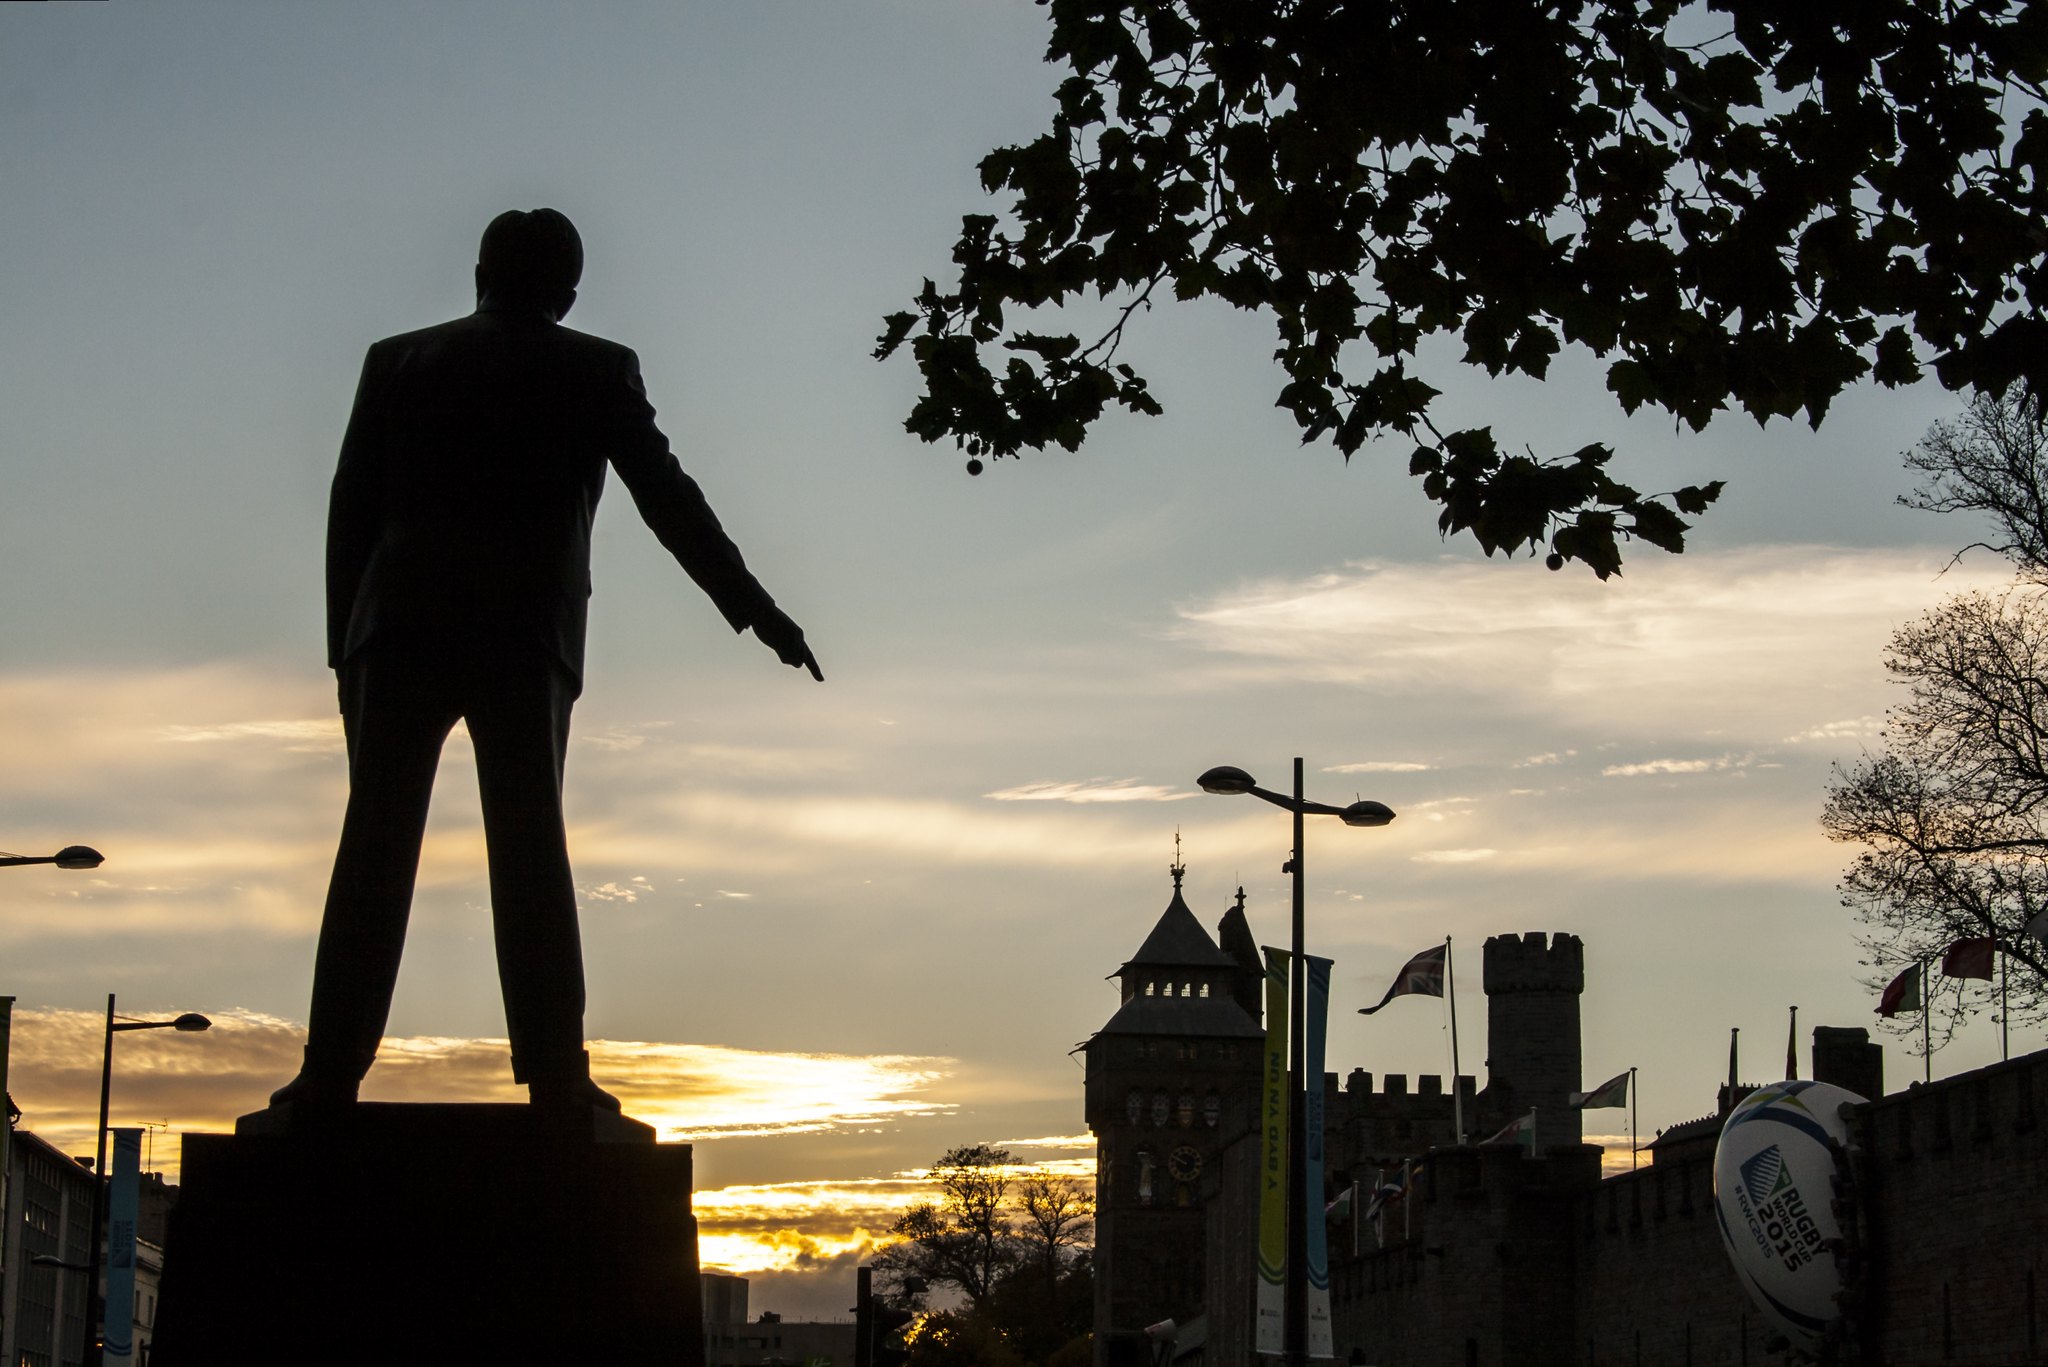 The statue of Aneurin Bevan pointing its finger at Cardiff Castle.